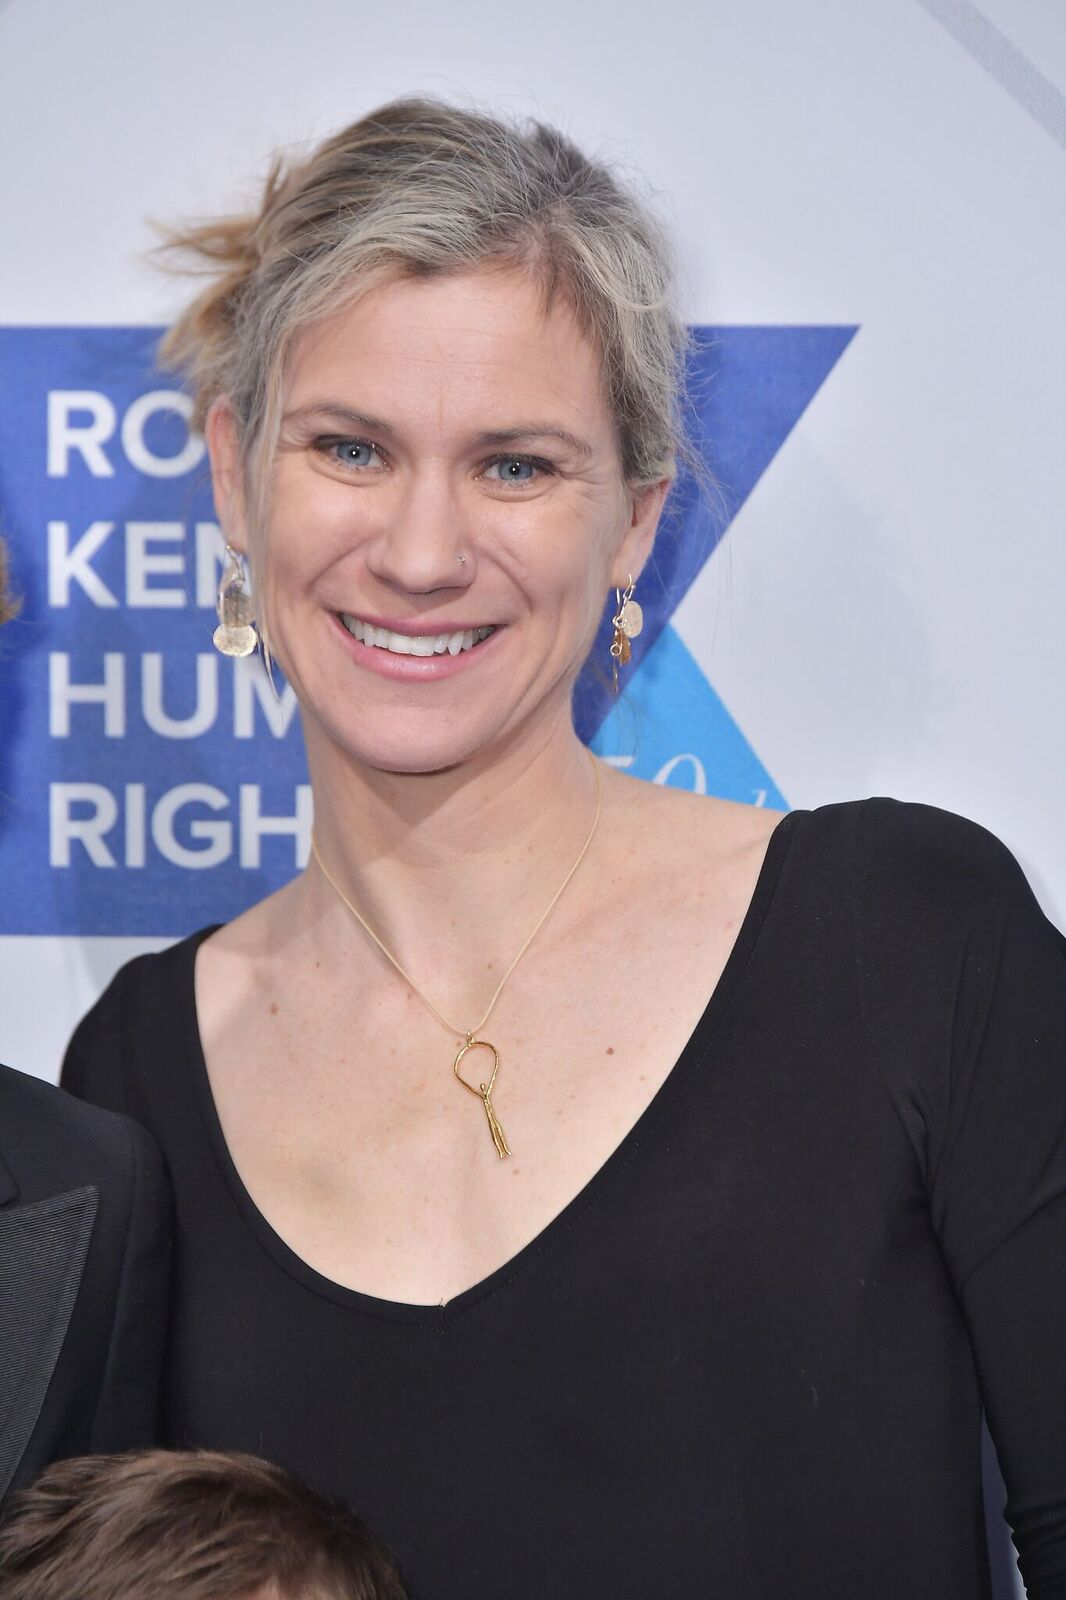 Maeve McKean at the Robert F. Kennedy Human Rights Ripple Of Hope Awards on December 12, 2018, in New York City | Photo: Michael Loccisano/Getty Images